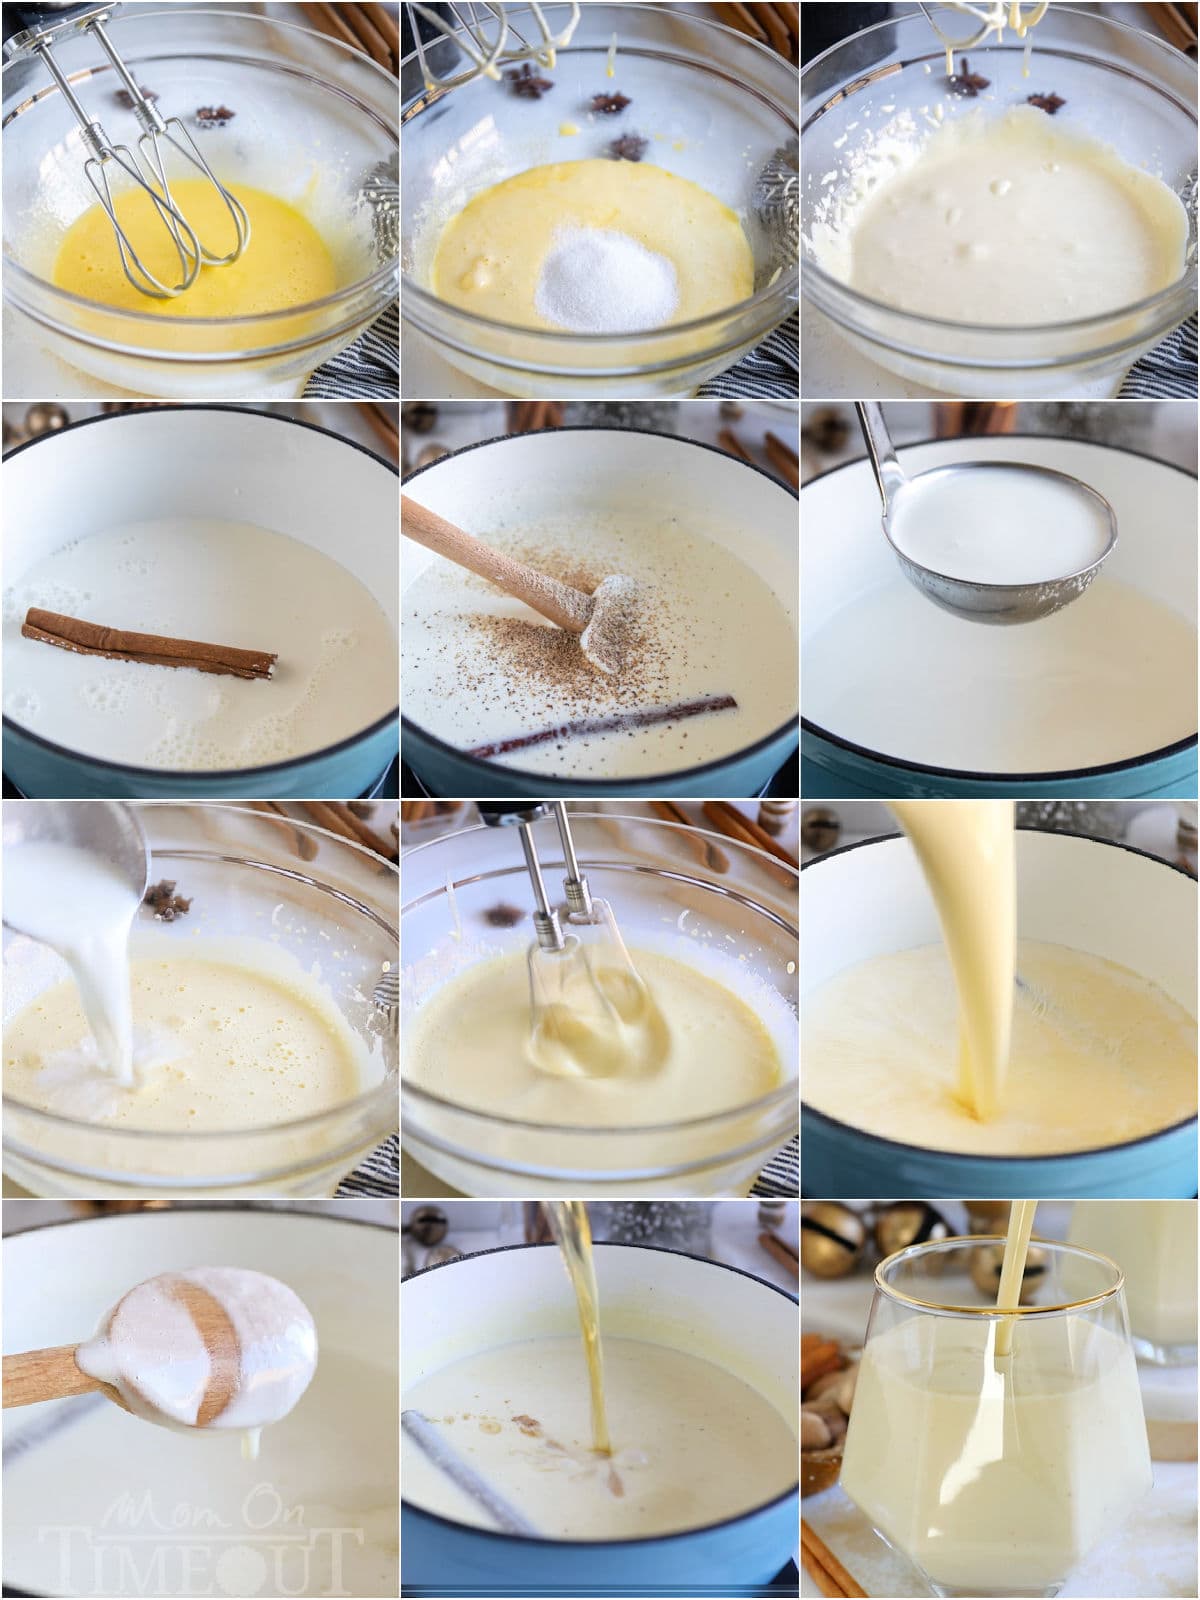 twelve image collage showing how to make homemade eggnog step by step.